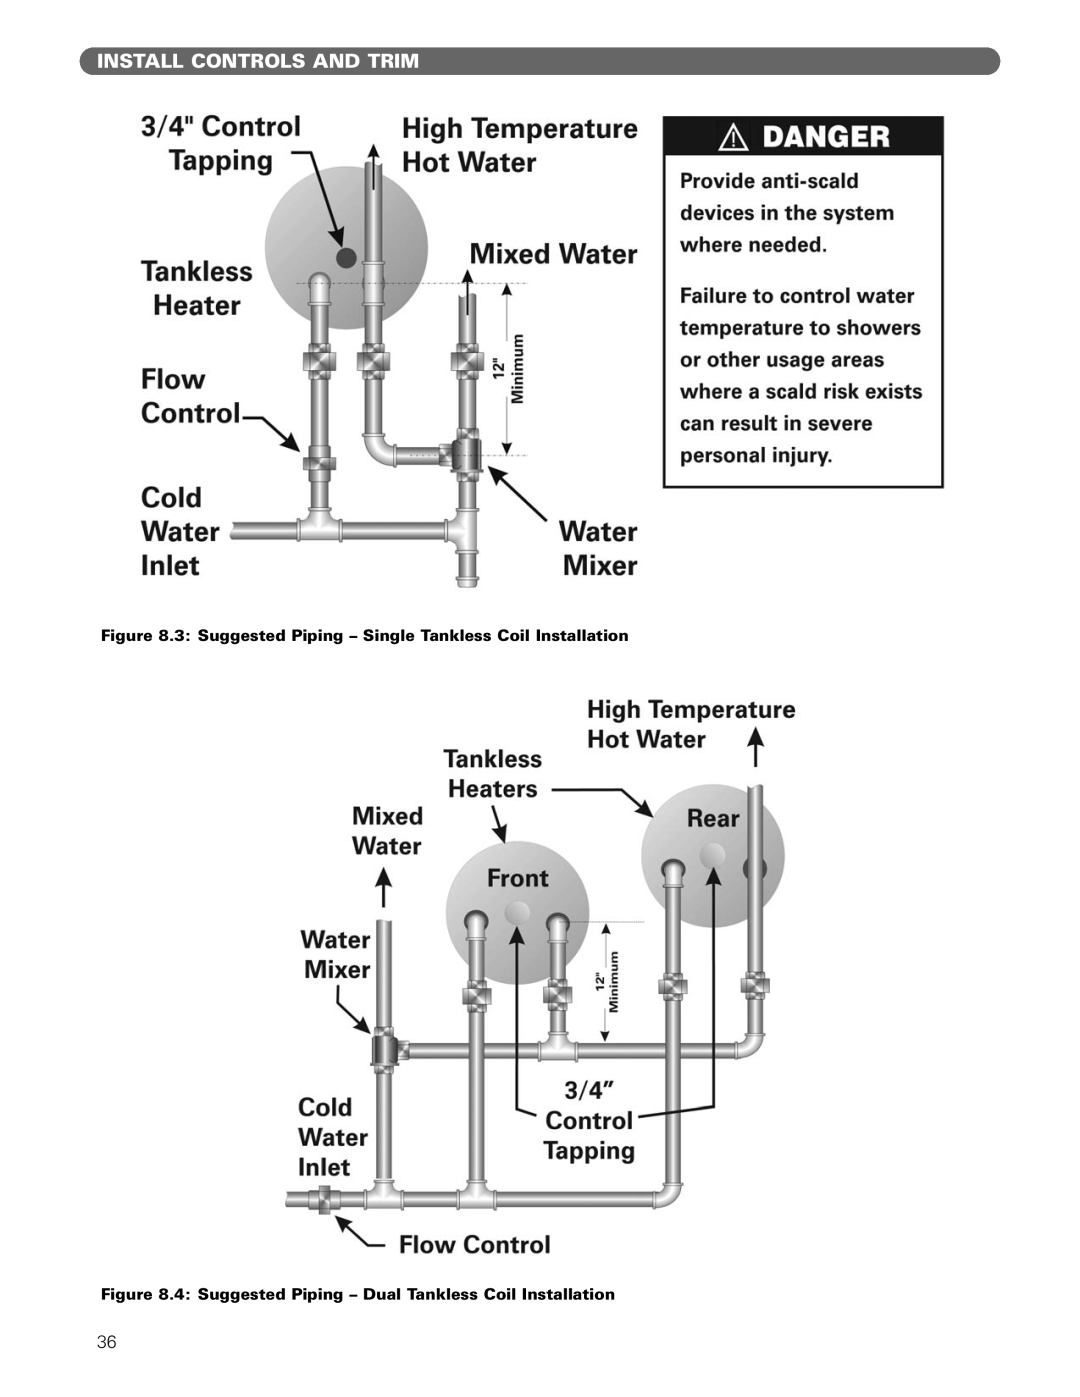 PB Heat Gas/Oil Boilers manual Install Controls And Trim, 3 Suggested Piping - Single Tankless Coil Installation 